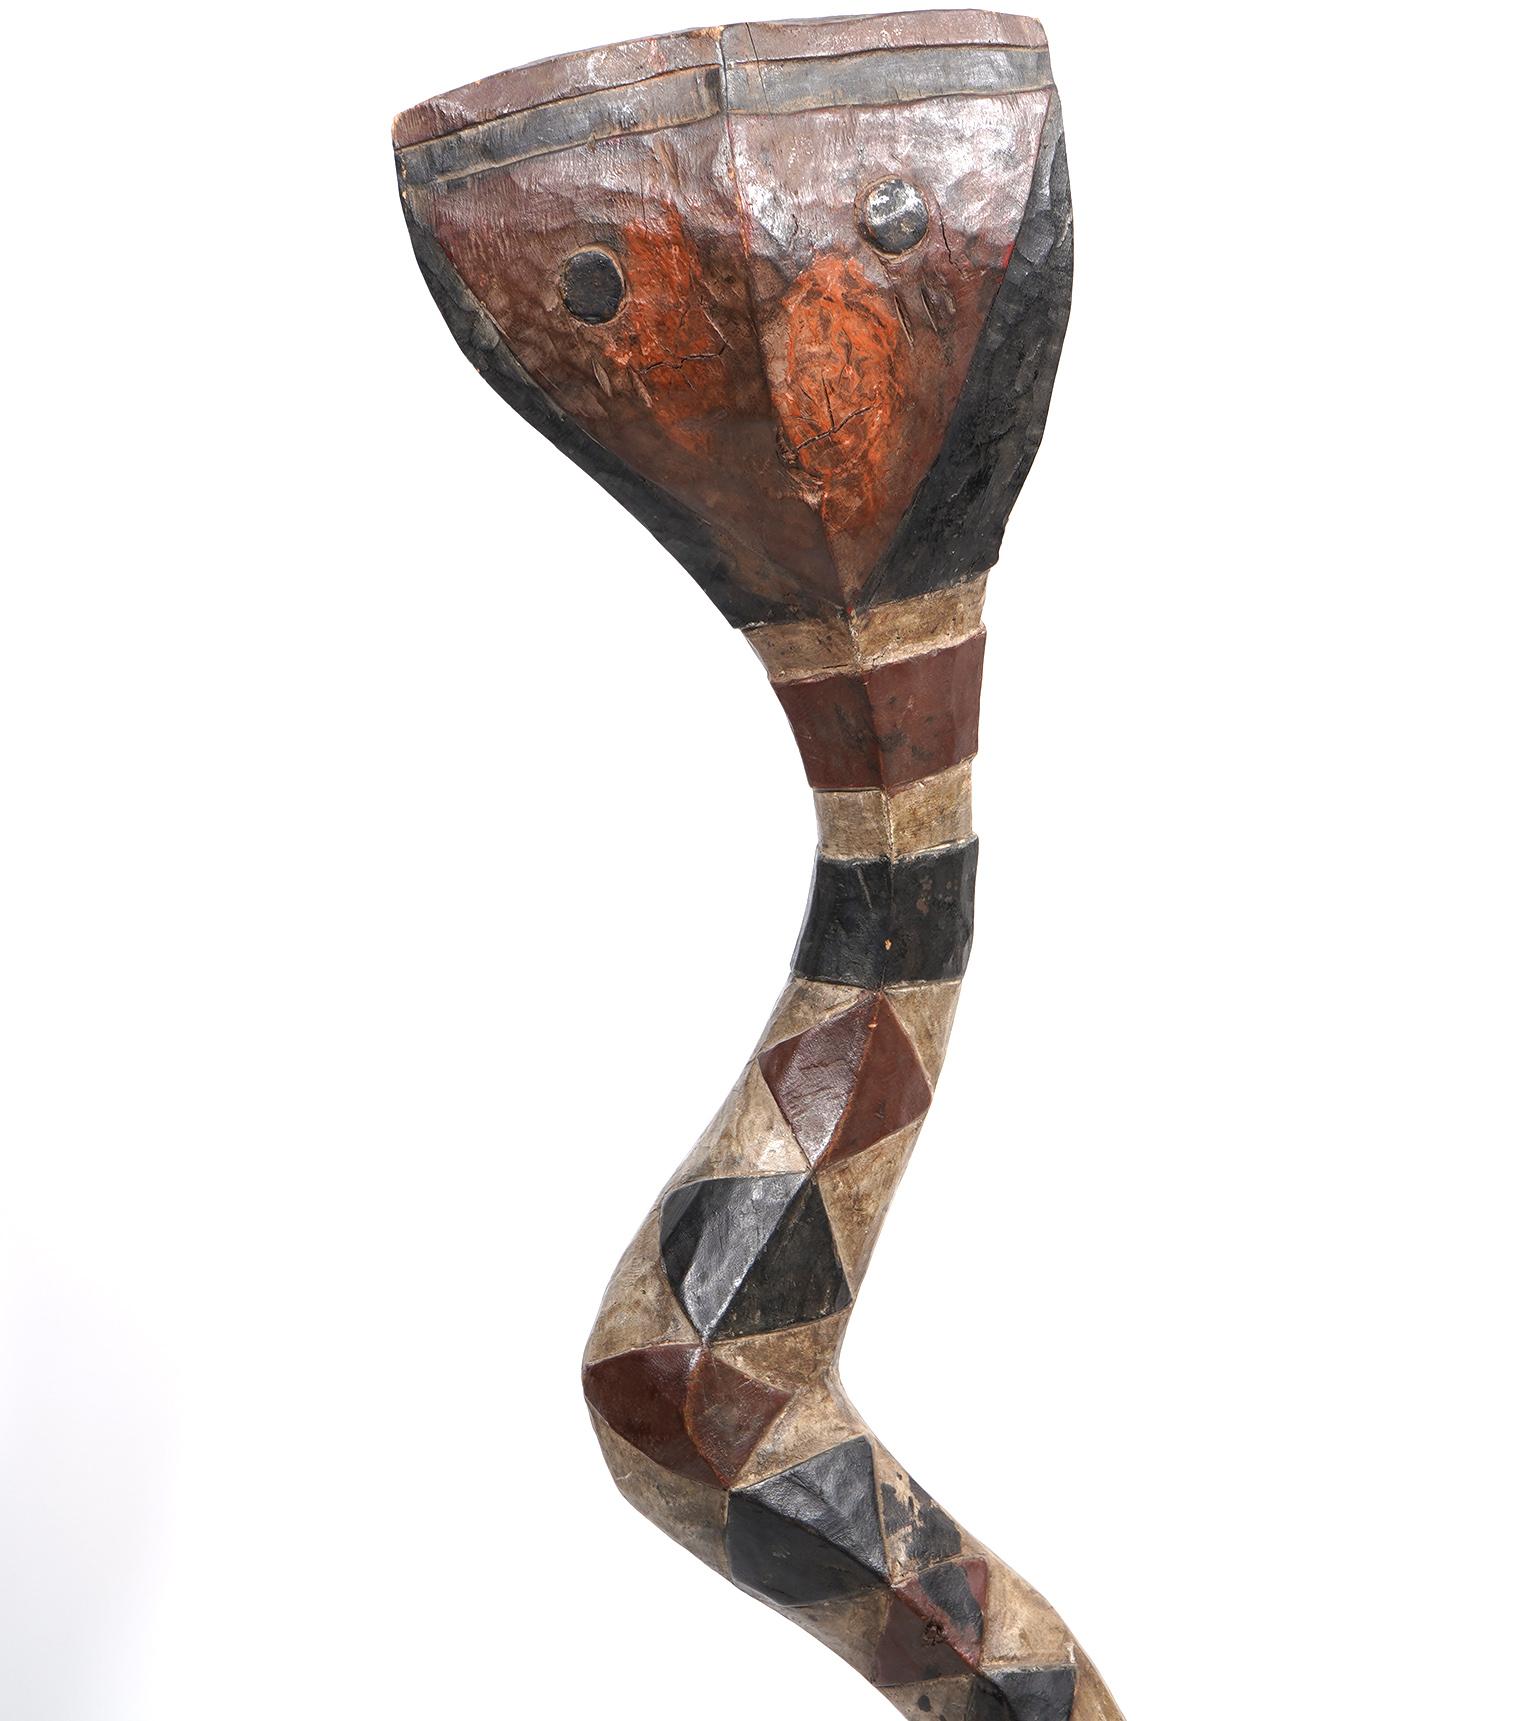 This is a Baga protective serpent, known in the literature under various names: Bansonyi, A-mantsho-na-tshol or Inap. In spite of of its aged look this particular carving is made for decorative purposes and has not been used ceremonially.
The